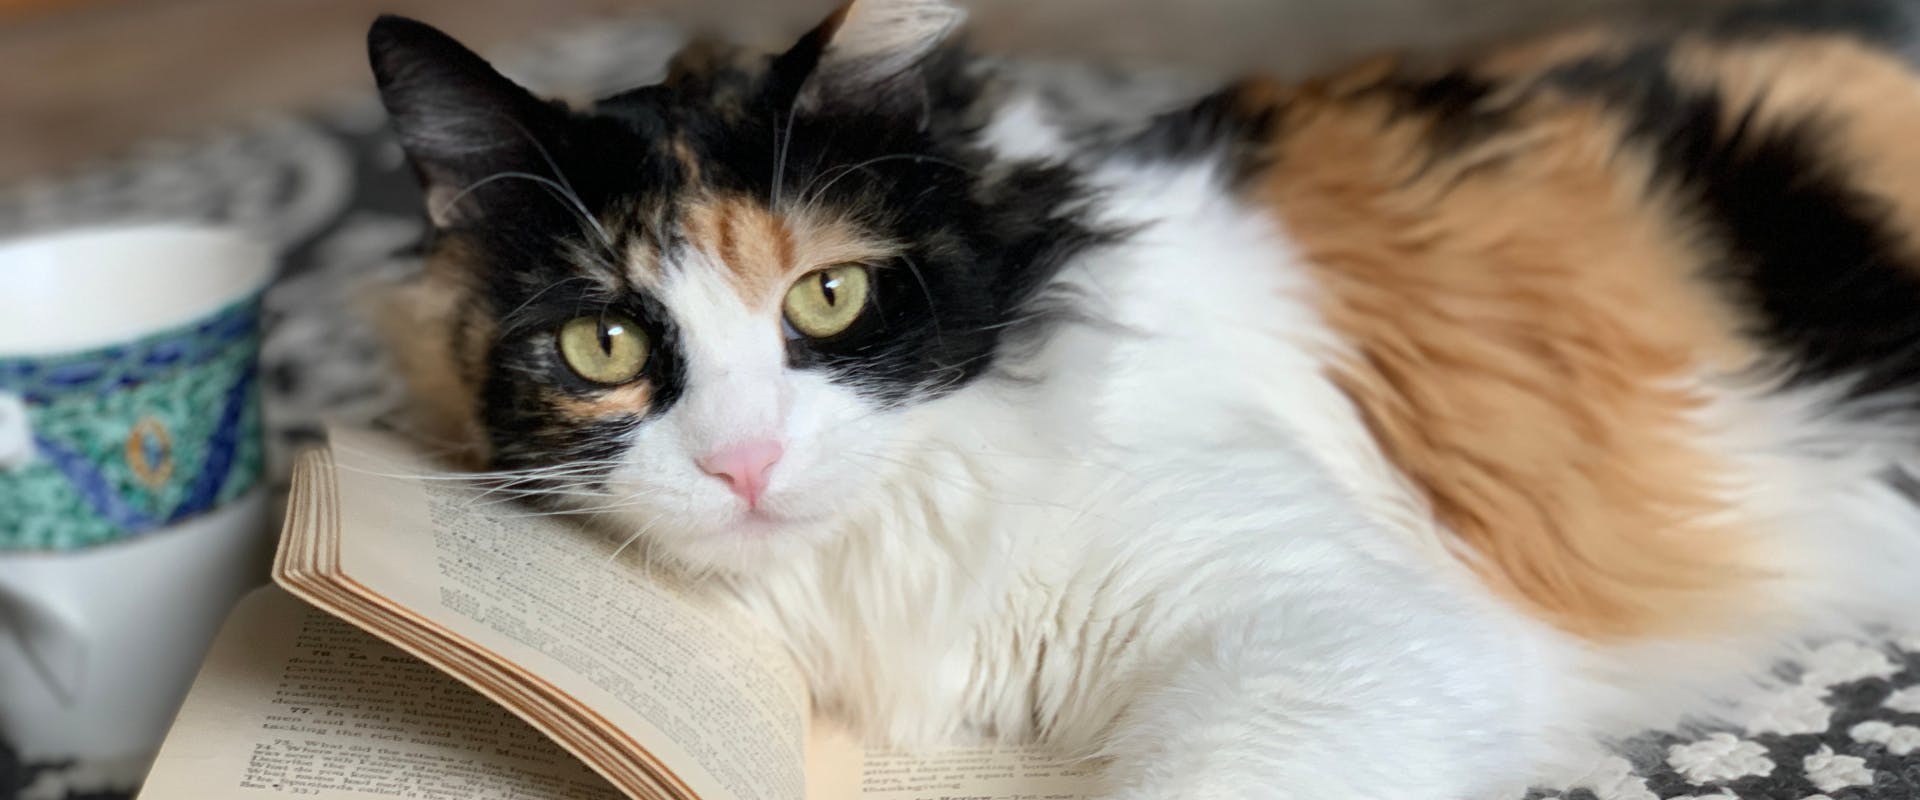 Calico cat lying on an open book.